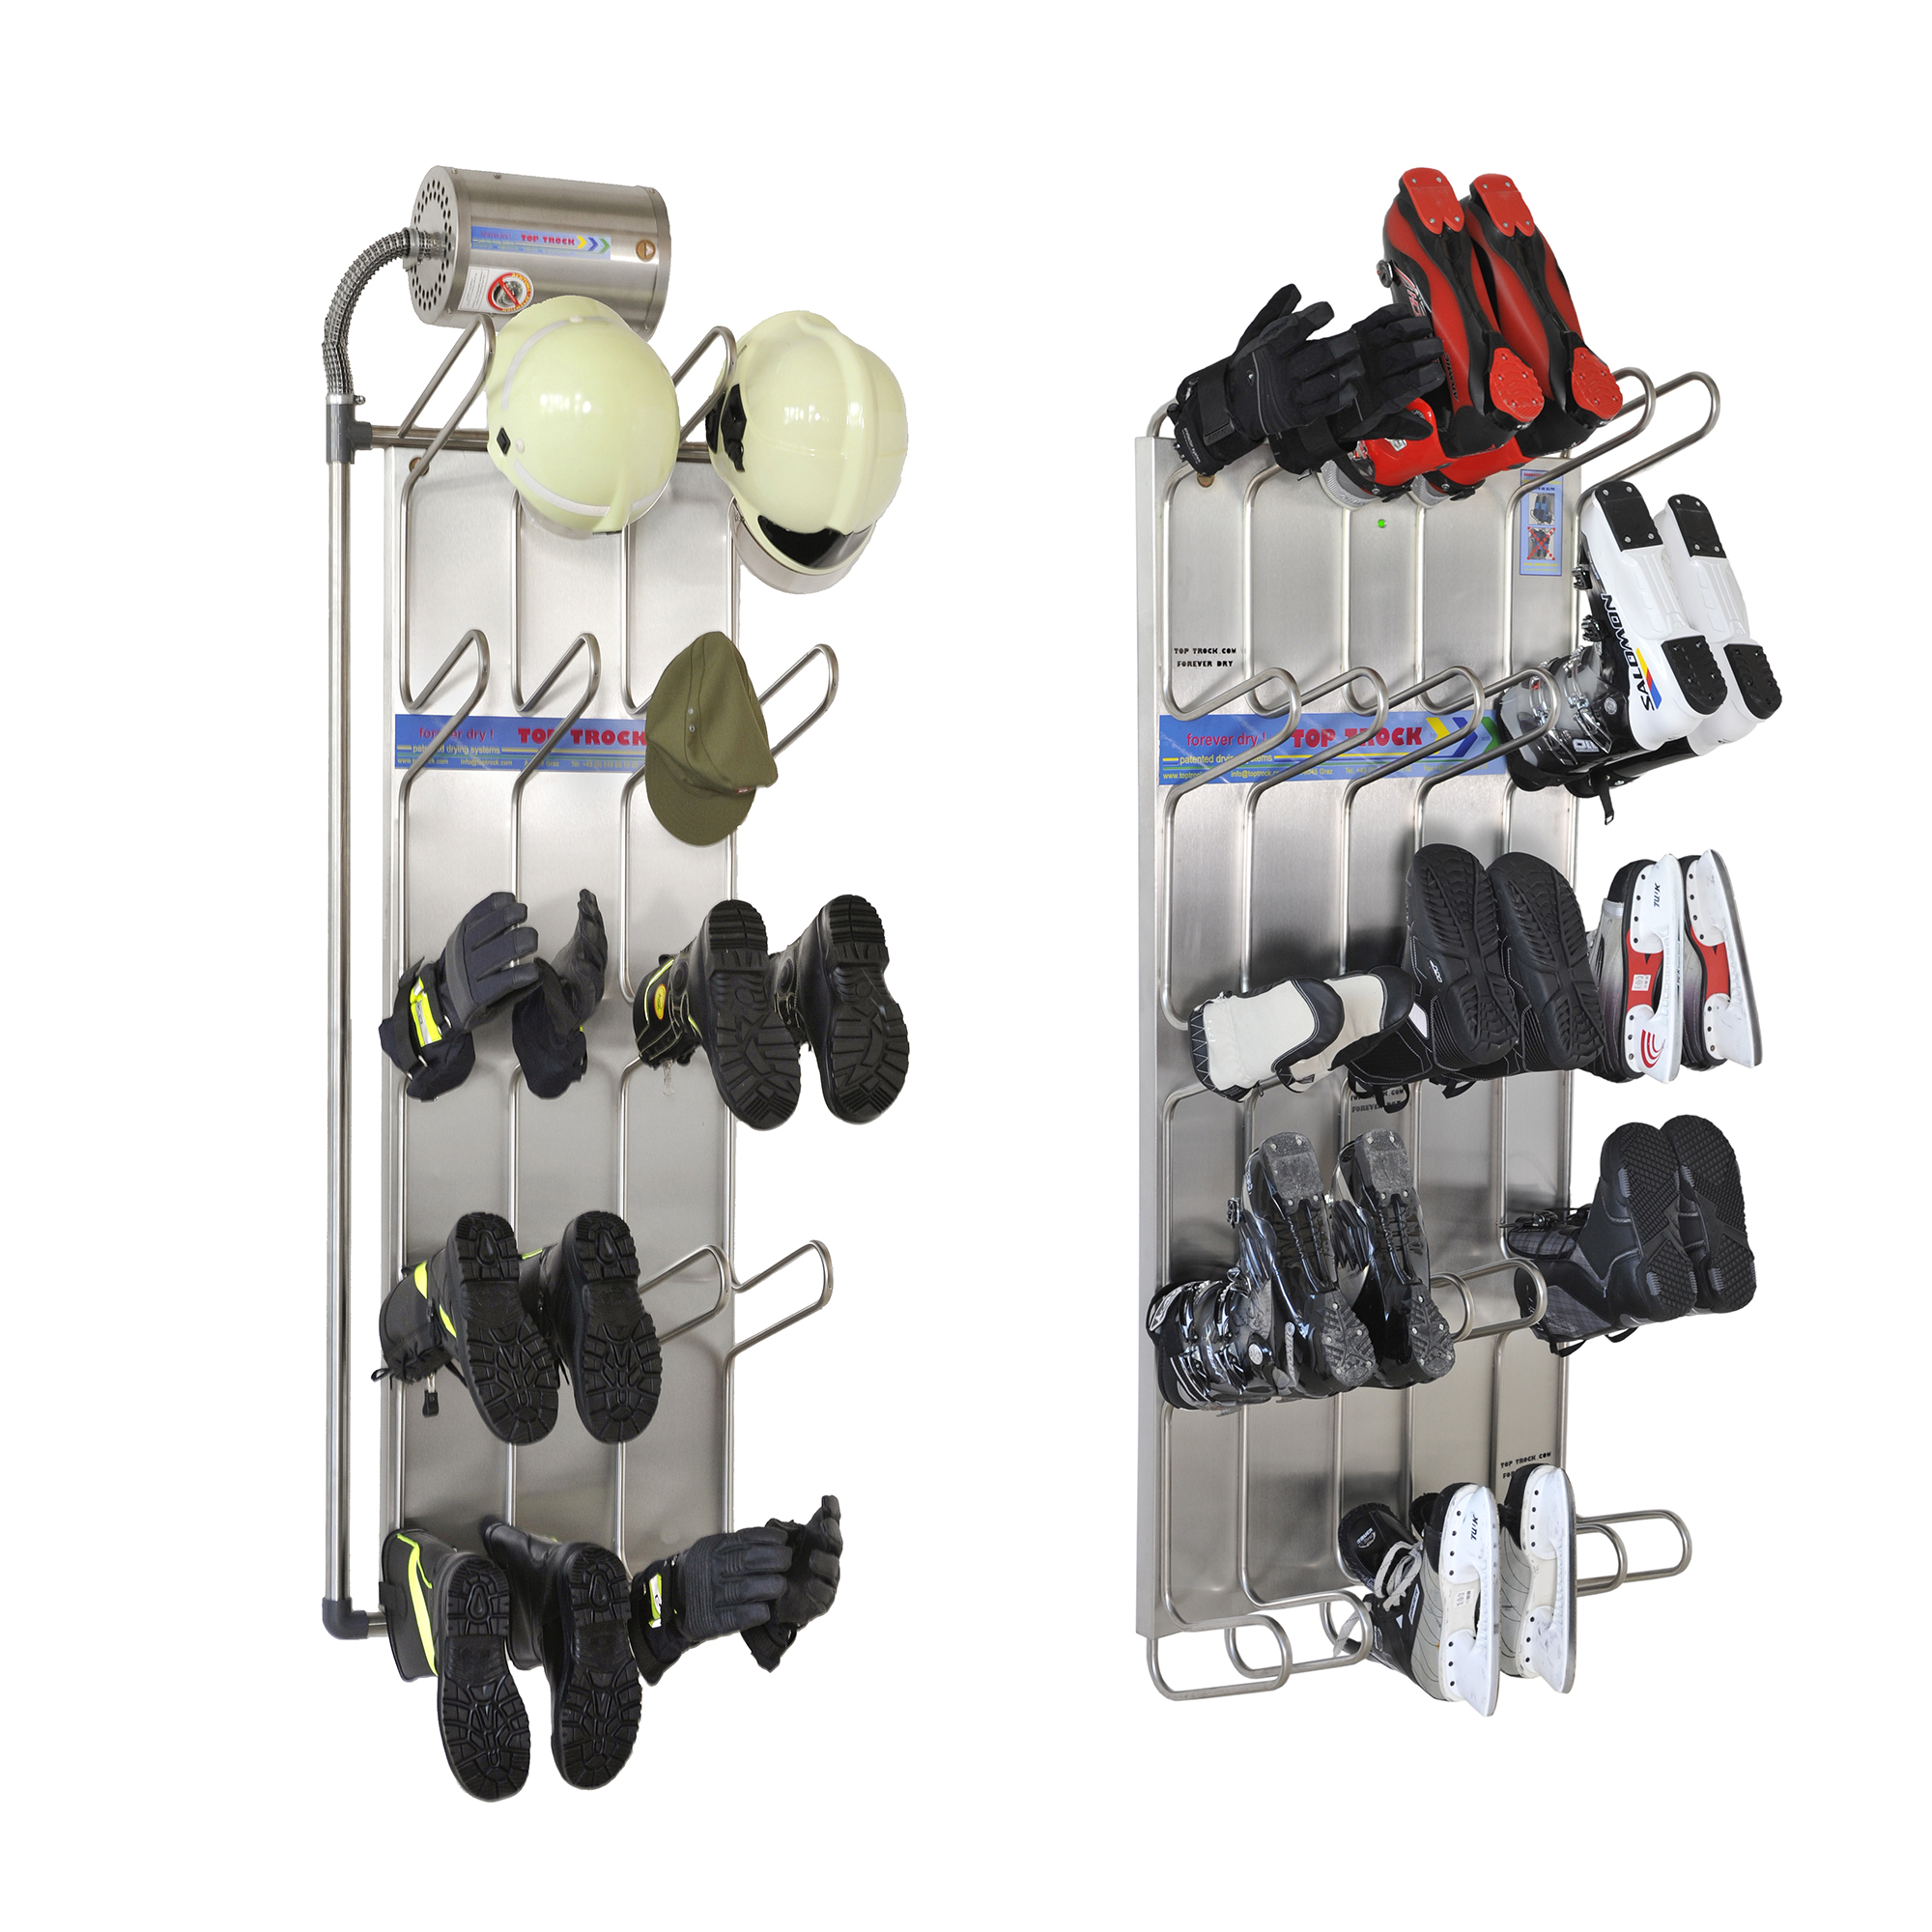 TopTrock GmbH: Shoe and boot dryer